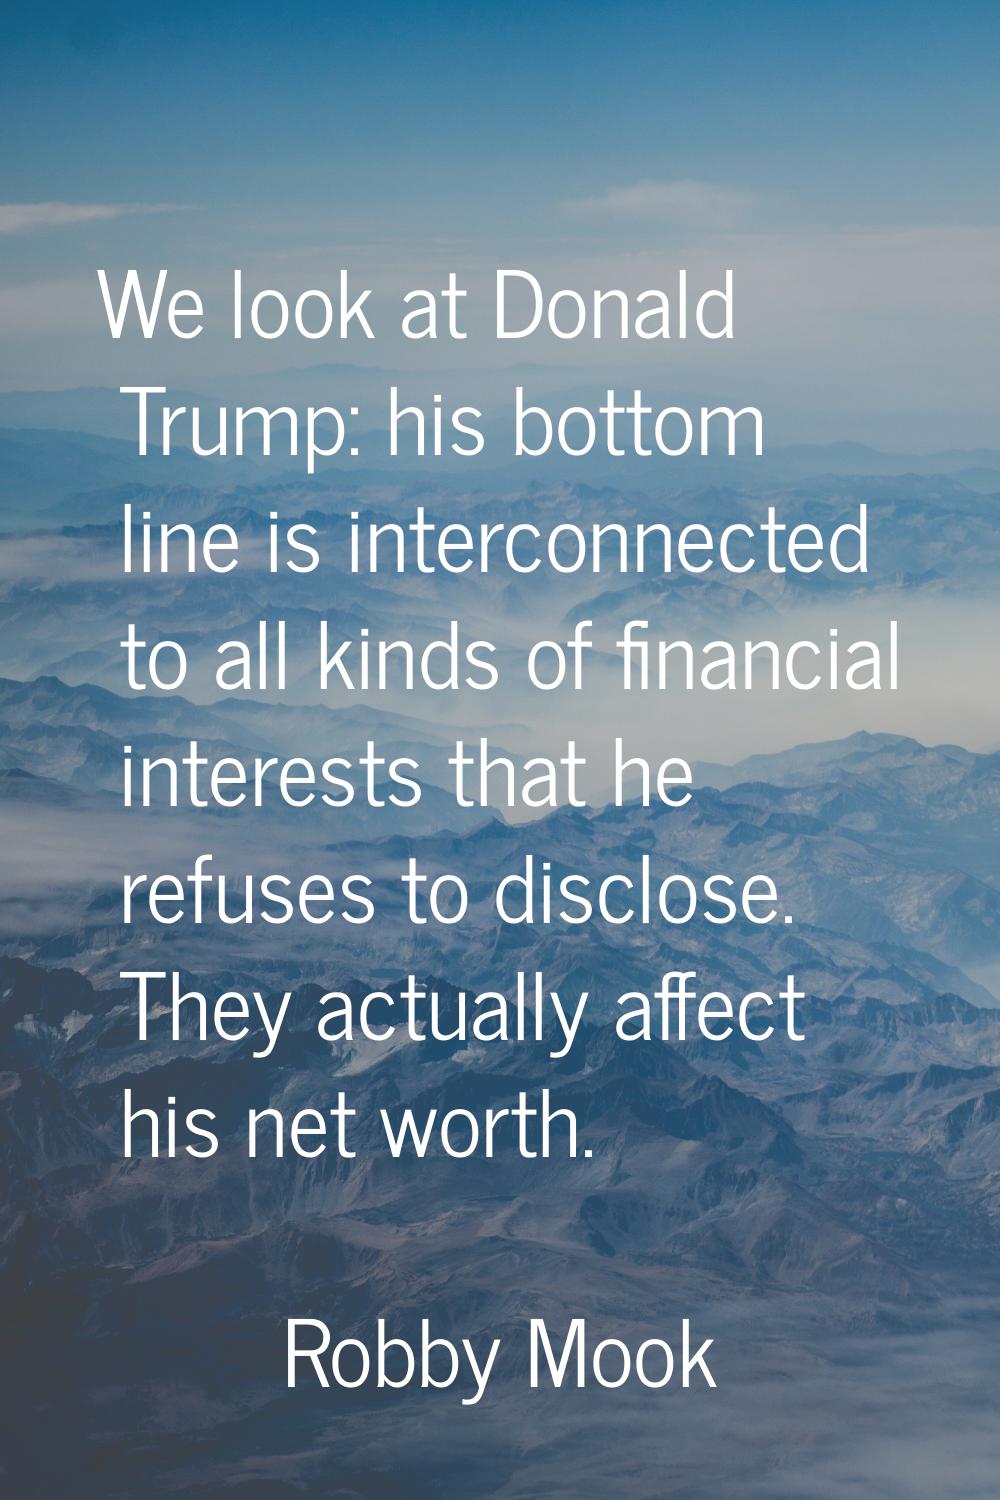 We look at Donald Trump: his bottom line is interconnected to all kinds of financial interests that